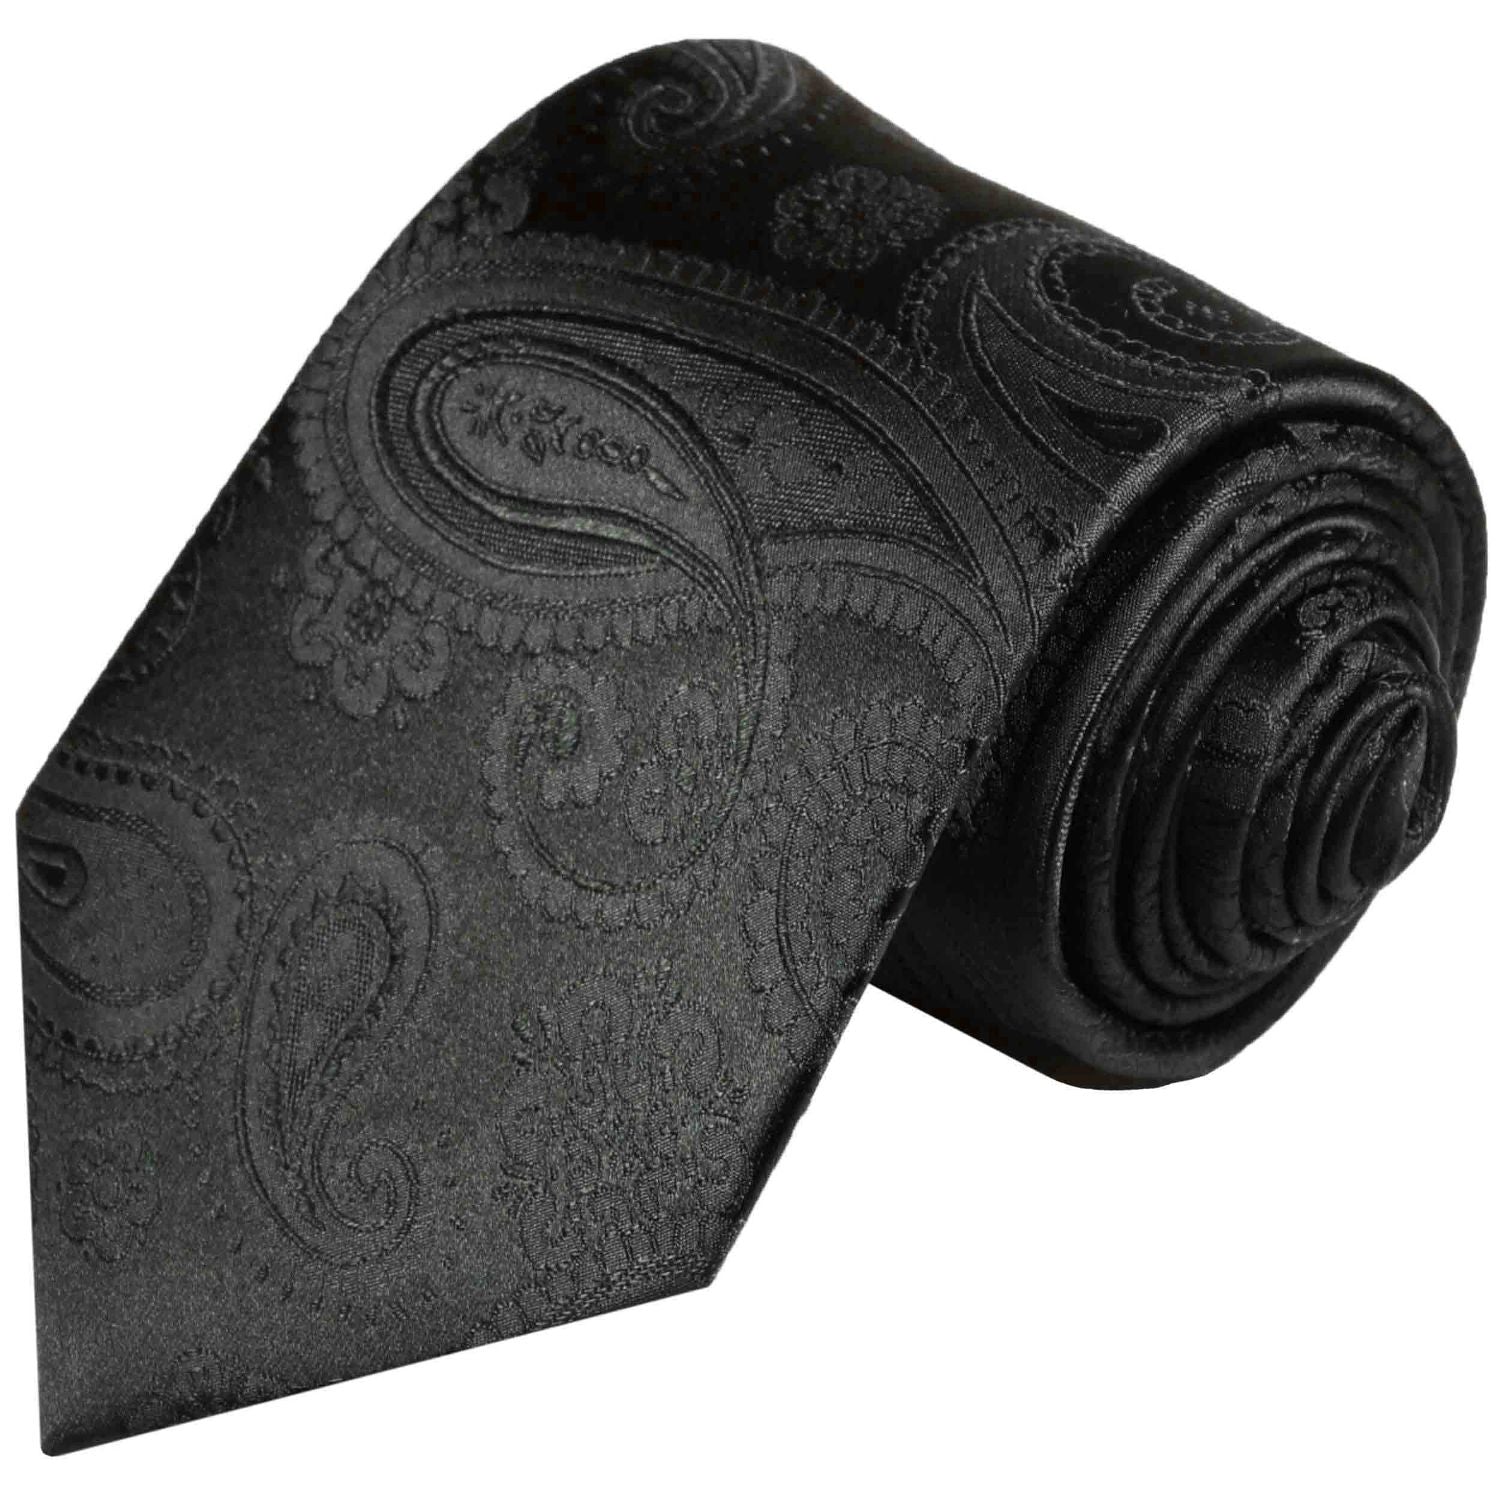 Classic Black Paisley Men's Tie and Pocket Square | Paul Malone